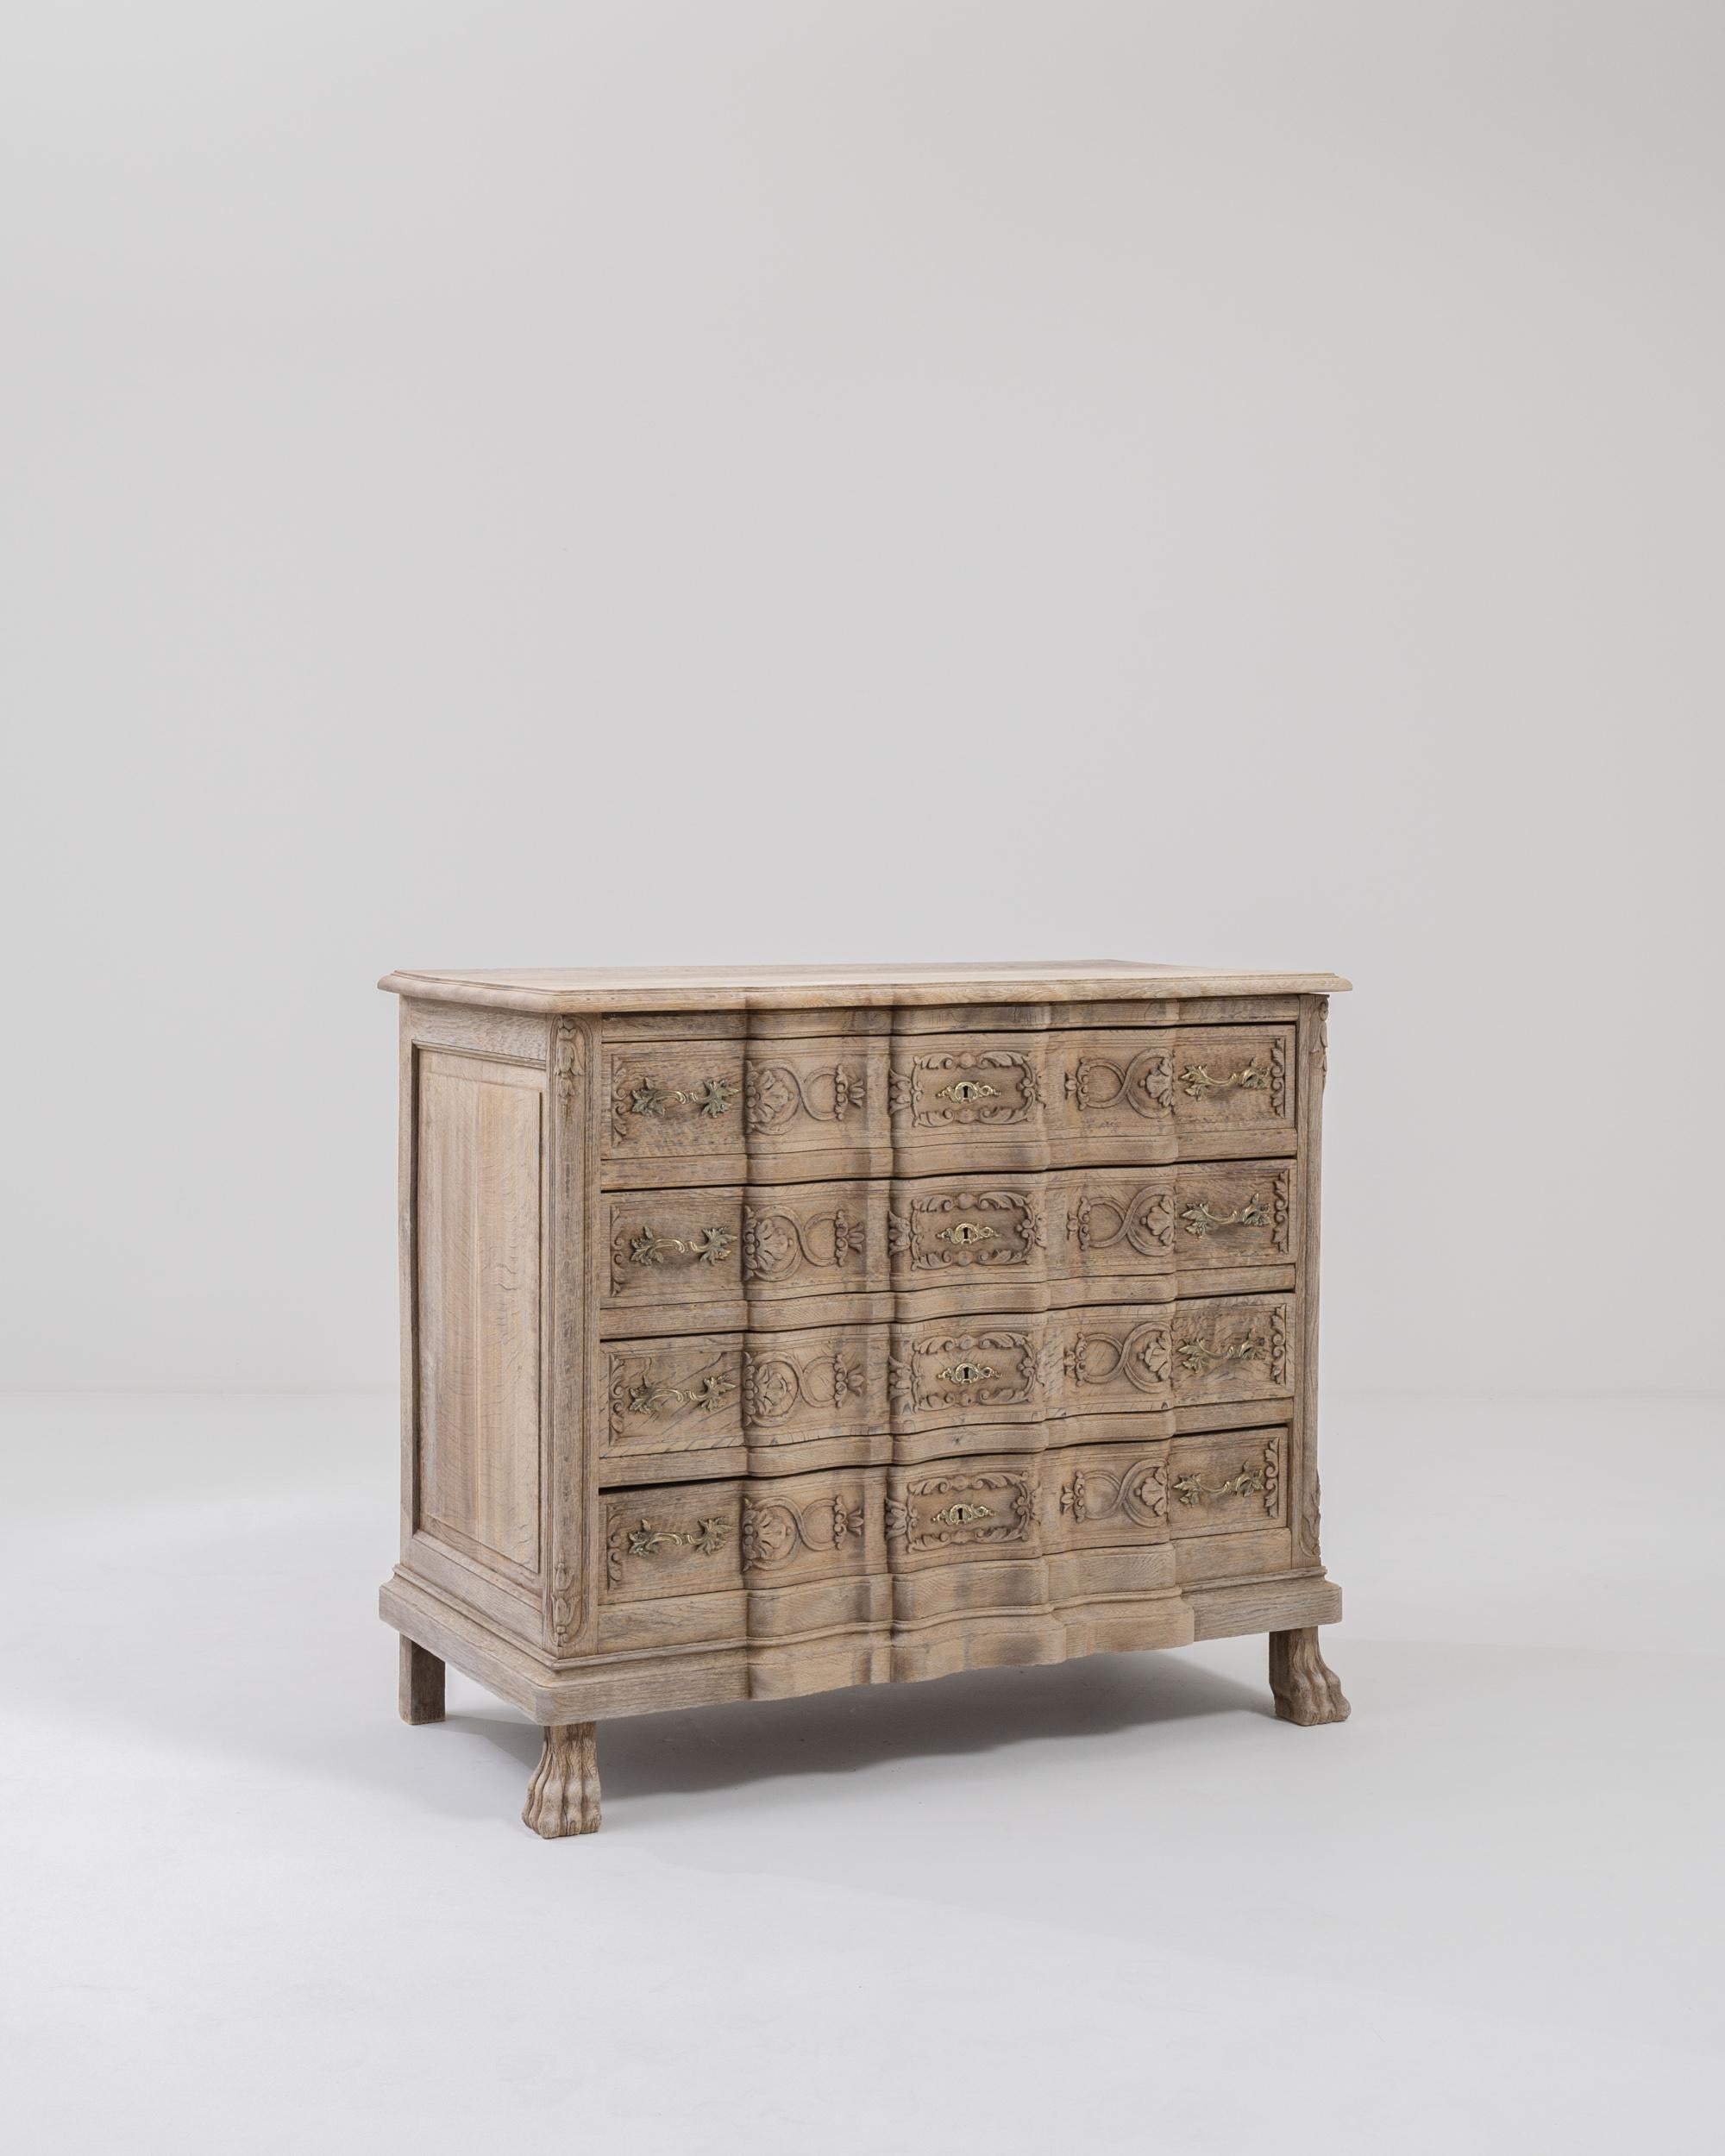 An oak chest of drawers from France, circa 1900. The Baroque styled front of this eye-catching chest of drawers has been elaborately shaped into ripples, which dance across its four front-facing drawers. Scroll patterning weaves across the waves of